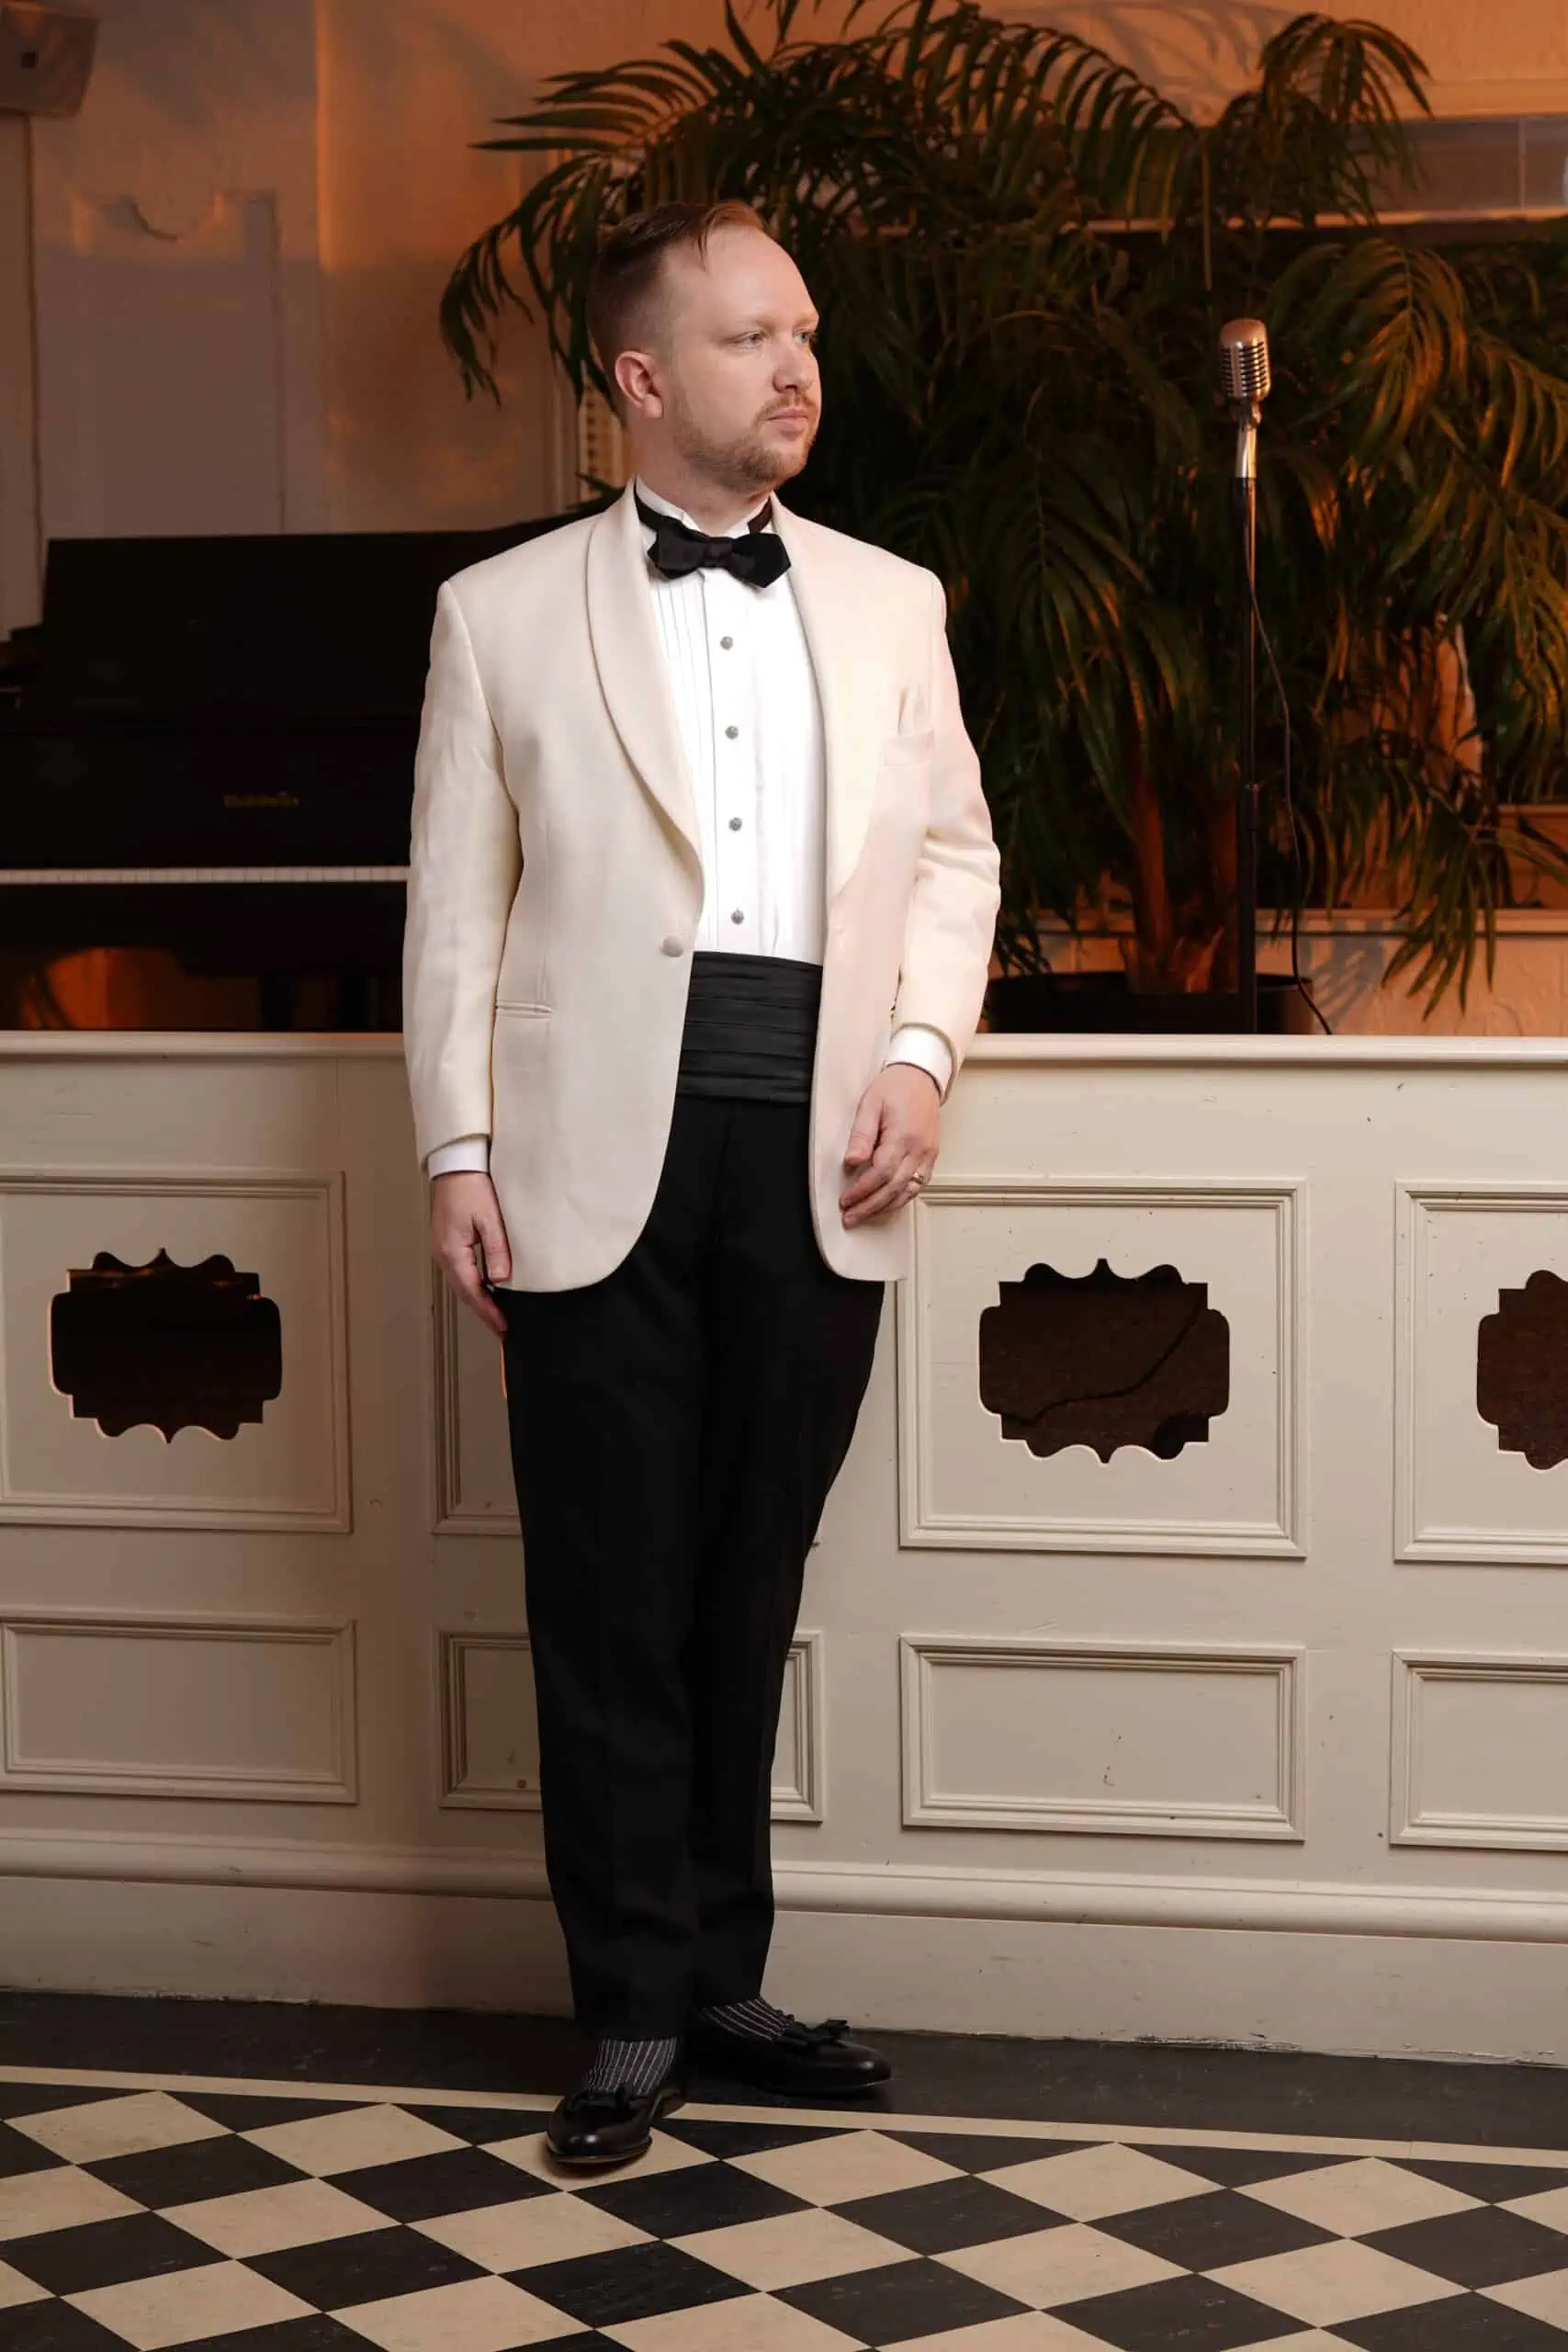 Eb wears a Black Tie ensemble with an ivory dinner jacket